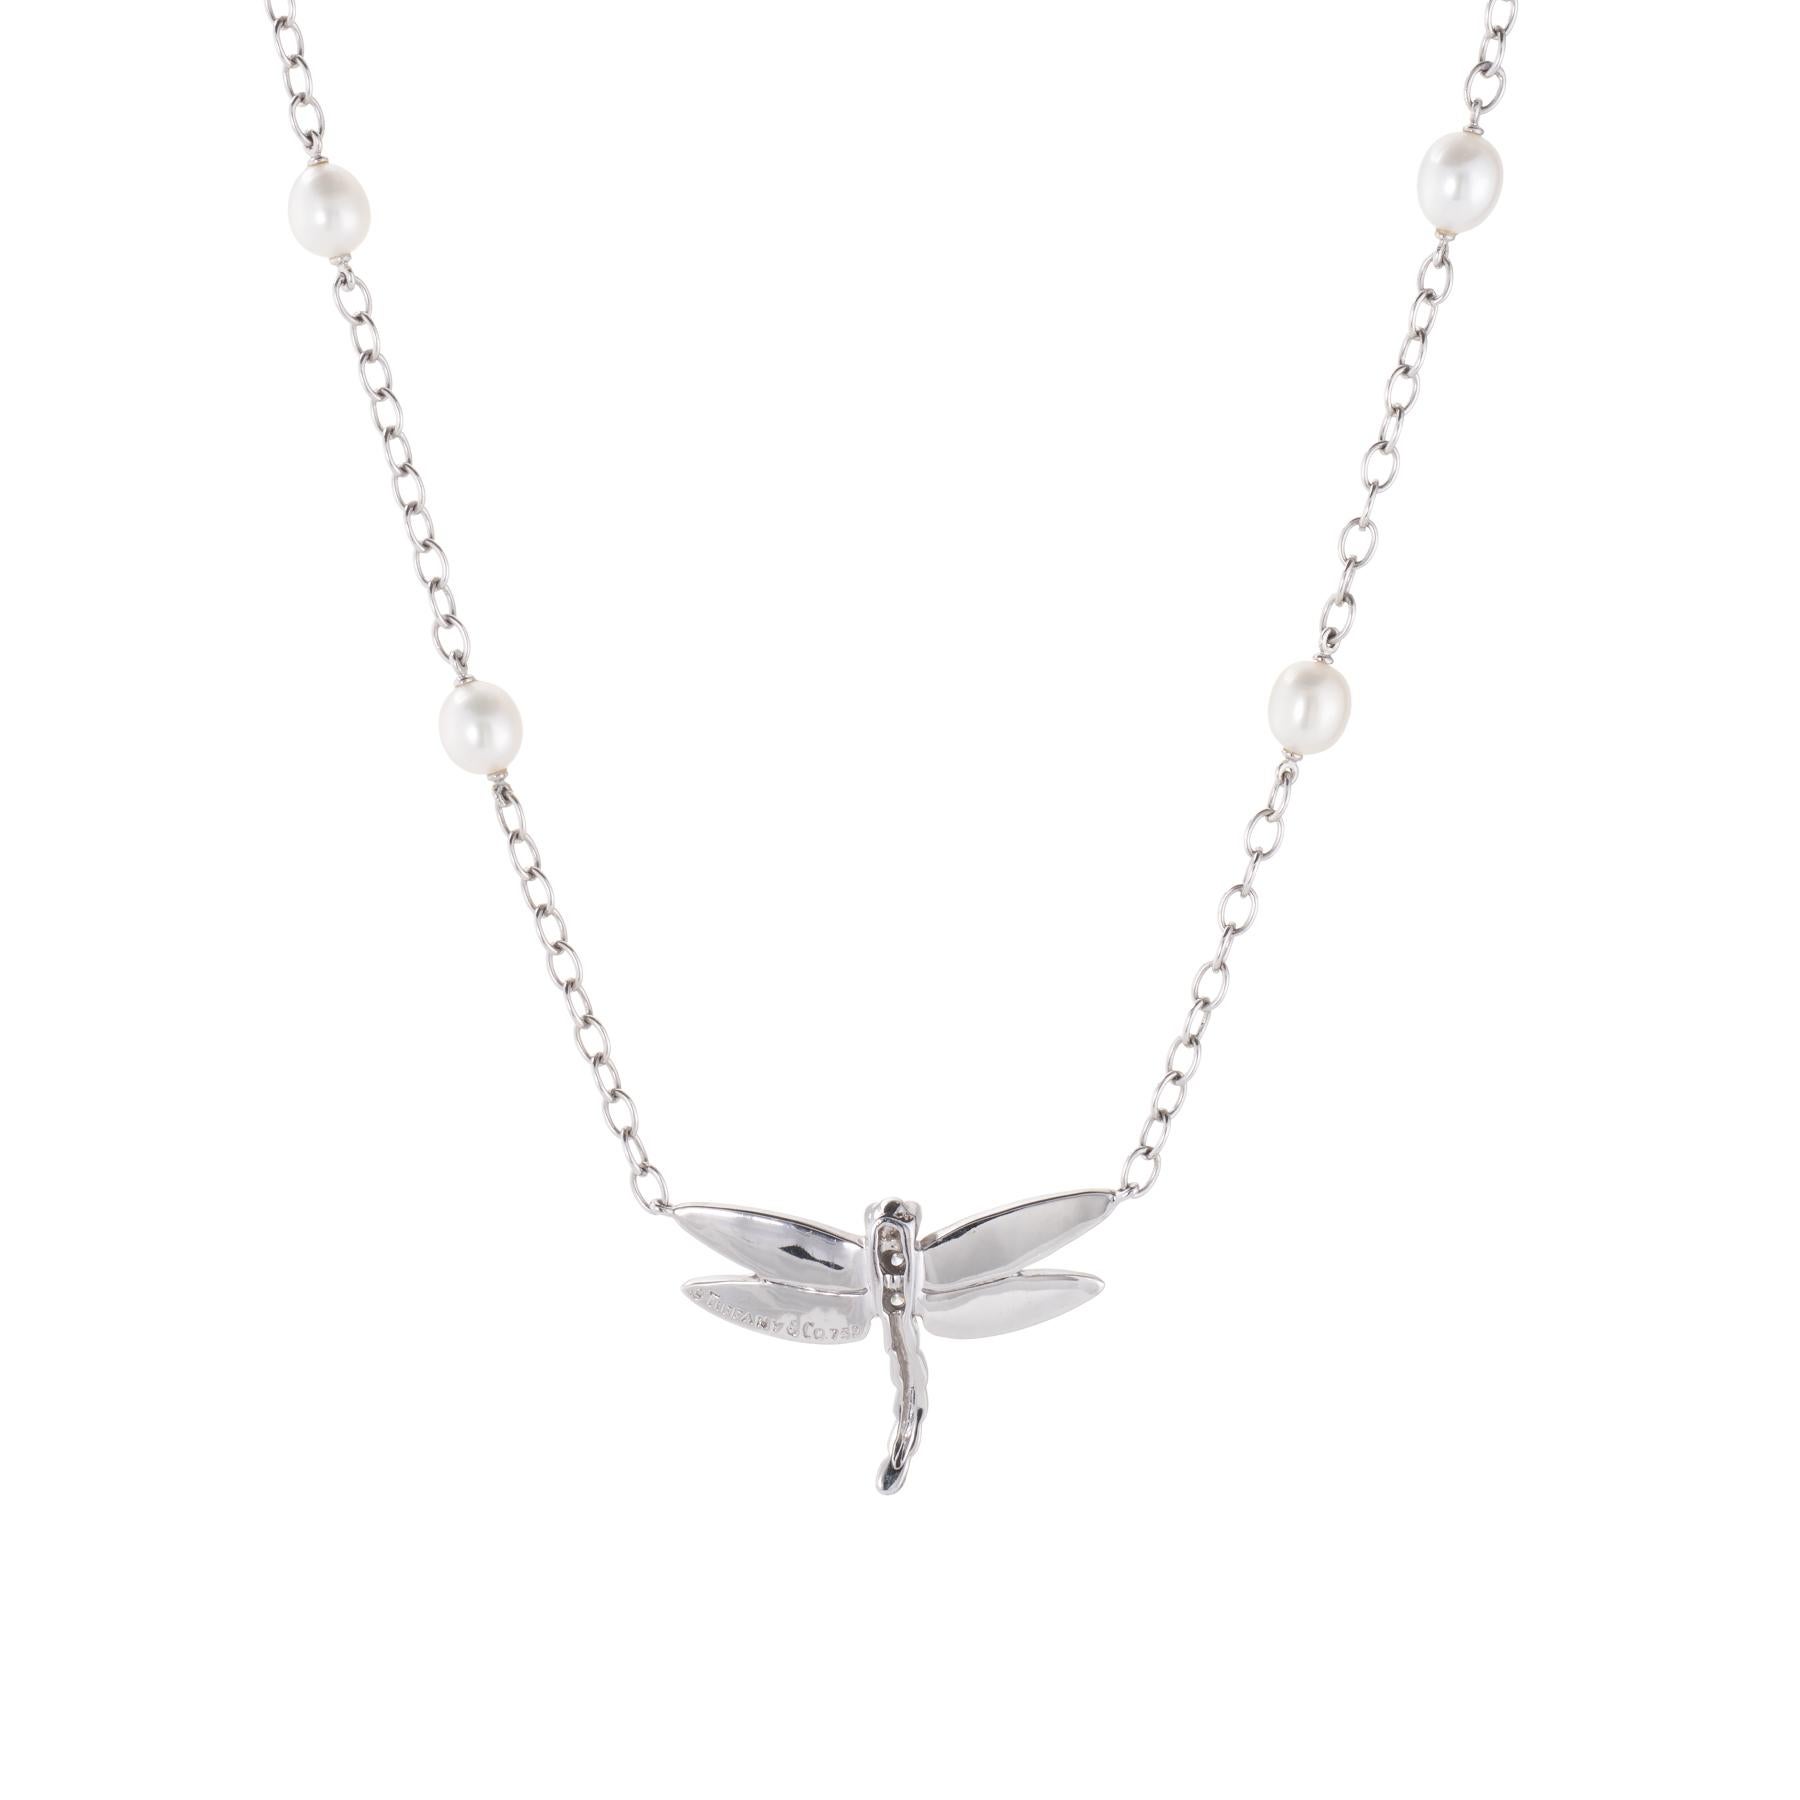 Elegant Tiffany & Co dragonfly necklace, crafted in 18 karat white gold.  

Diamonds total an estimated 0.10 carats (estimated at F-G color and VVS2 clarity), accented with freshwater cultured pearls that measure 5.5mm each. 

The necklace retailed